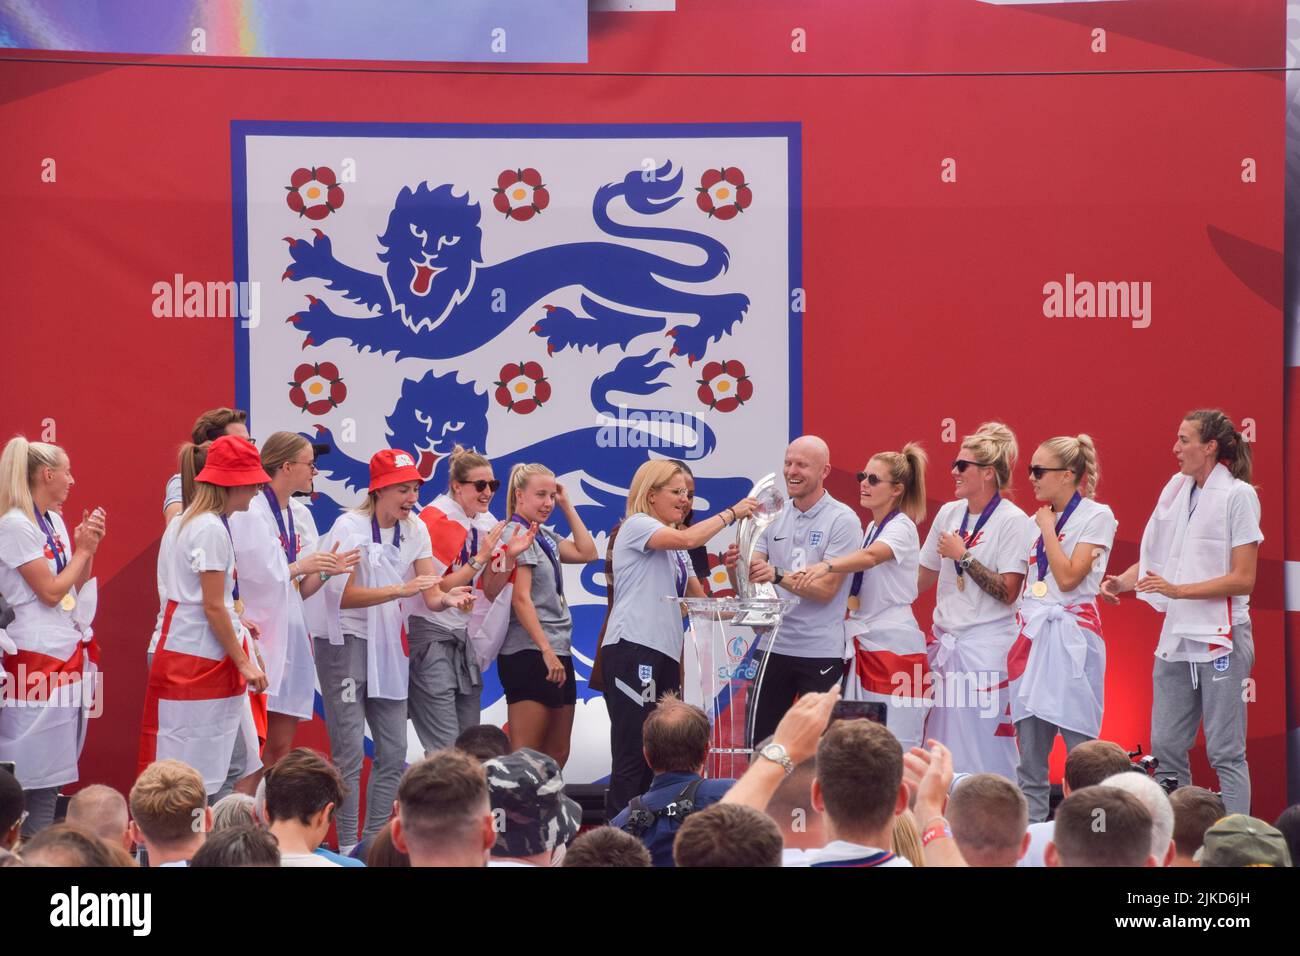 London, UK. 01st Aug, 2022. The England team celebrates on the stage during the Women's Euro 2022 special event in Trafalgar Square. Thousands of people gathered to celebrate the England team, known as the Lionesses, winning Women's Euro 2022 soccer tournament. England beat Germany 2-1. (Photo by Vuk Valcic/SOPA Images/Sipa USA) Credit: Sipa USA/Alamy Live News Stock Photo